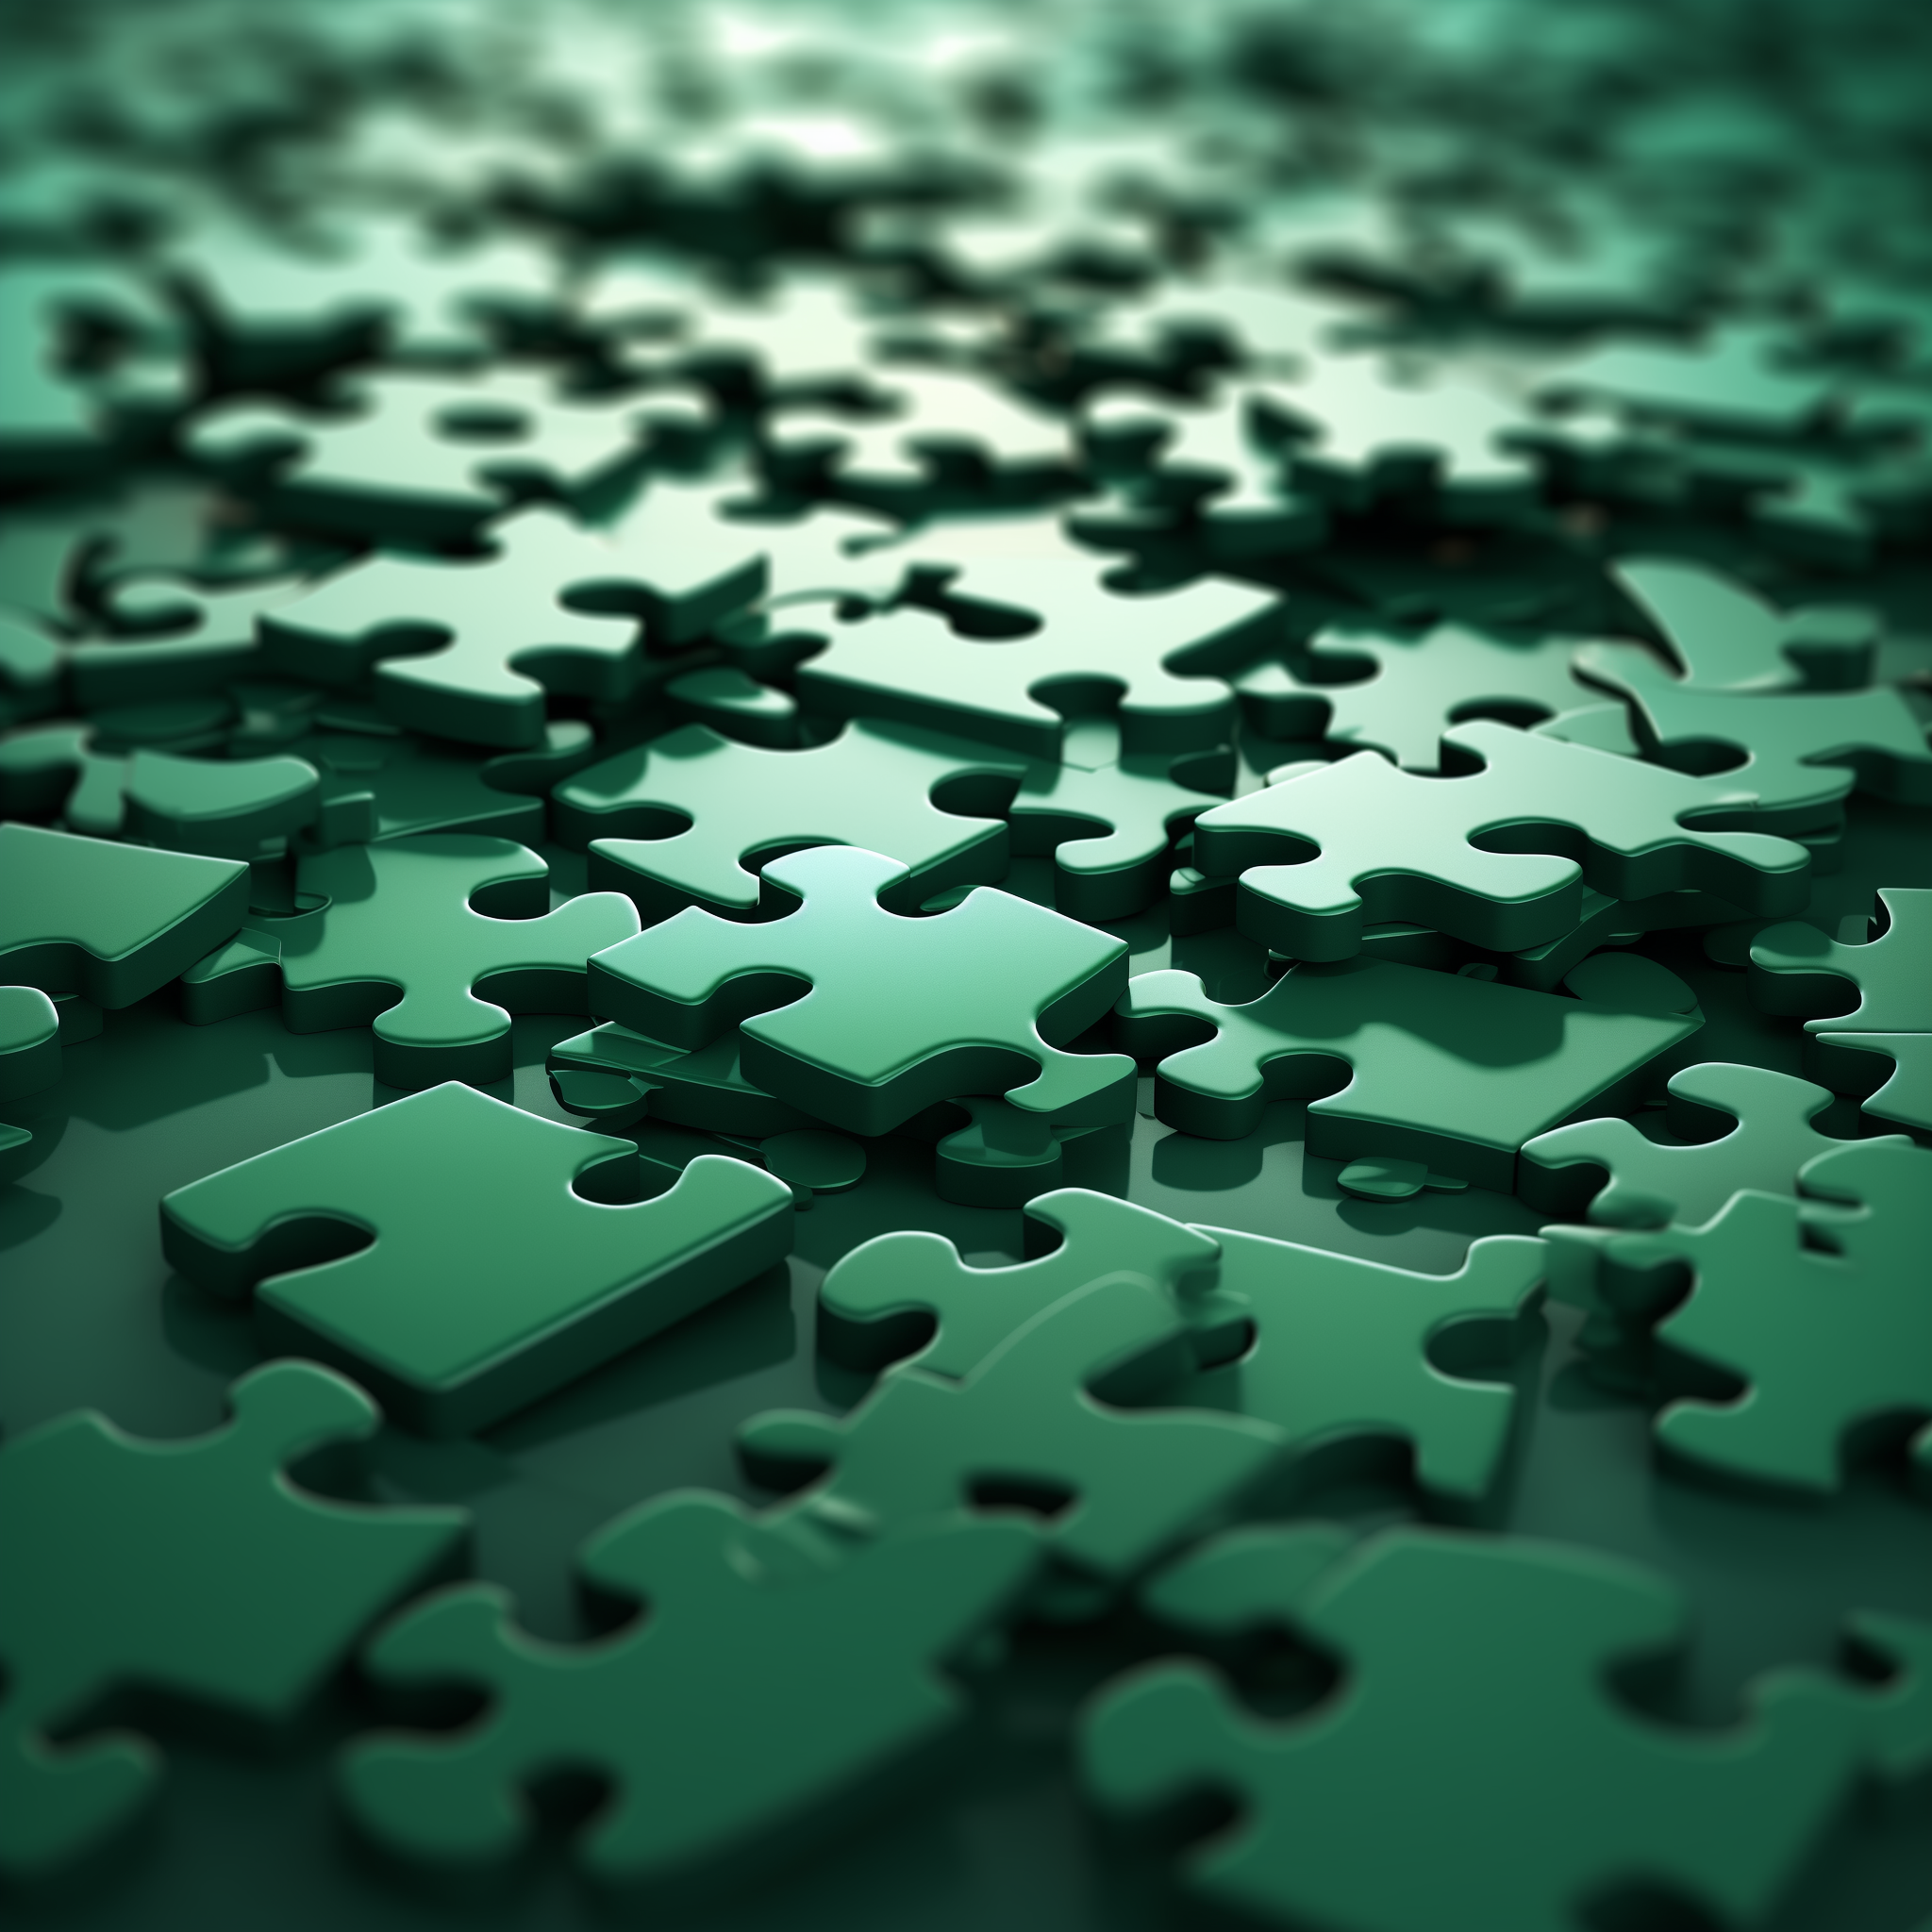 A close-up view of interlocking jigsaw puzzle pieces in various shades of green, with one piece standing out as it is detached from the group.